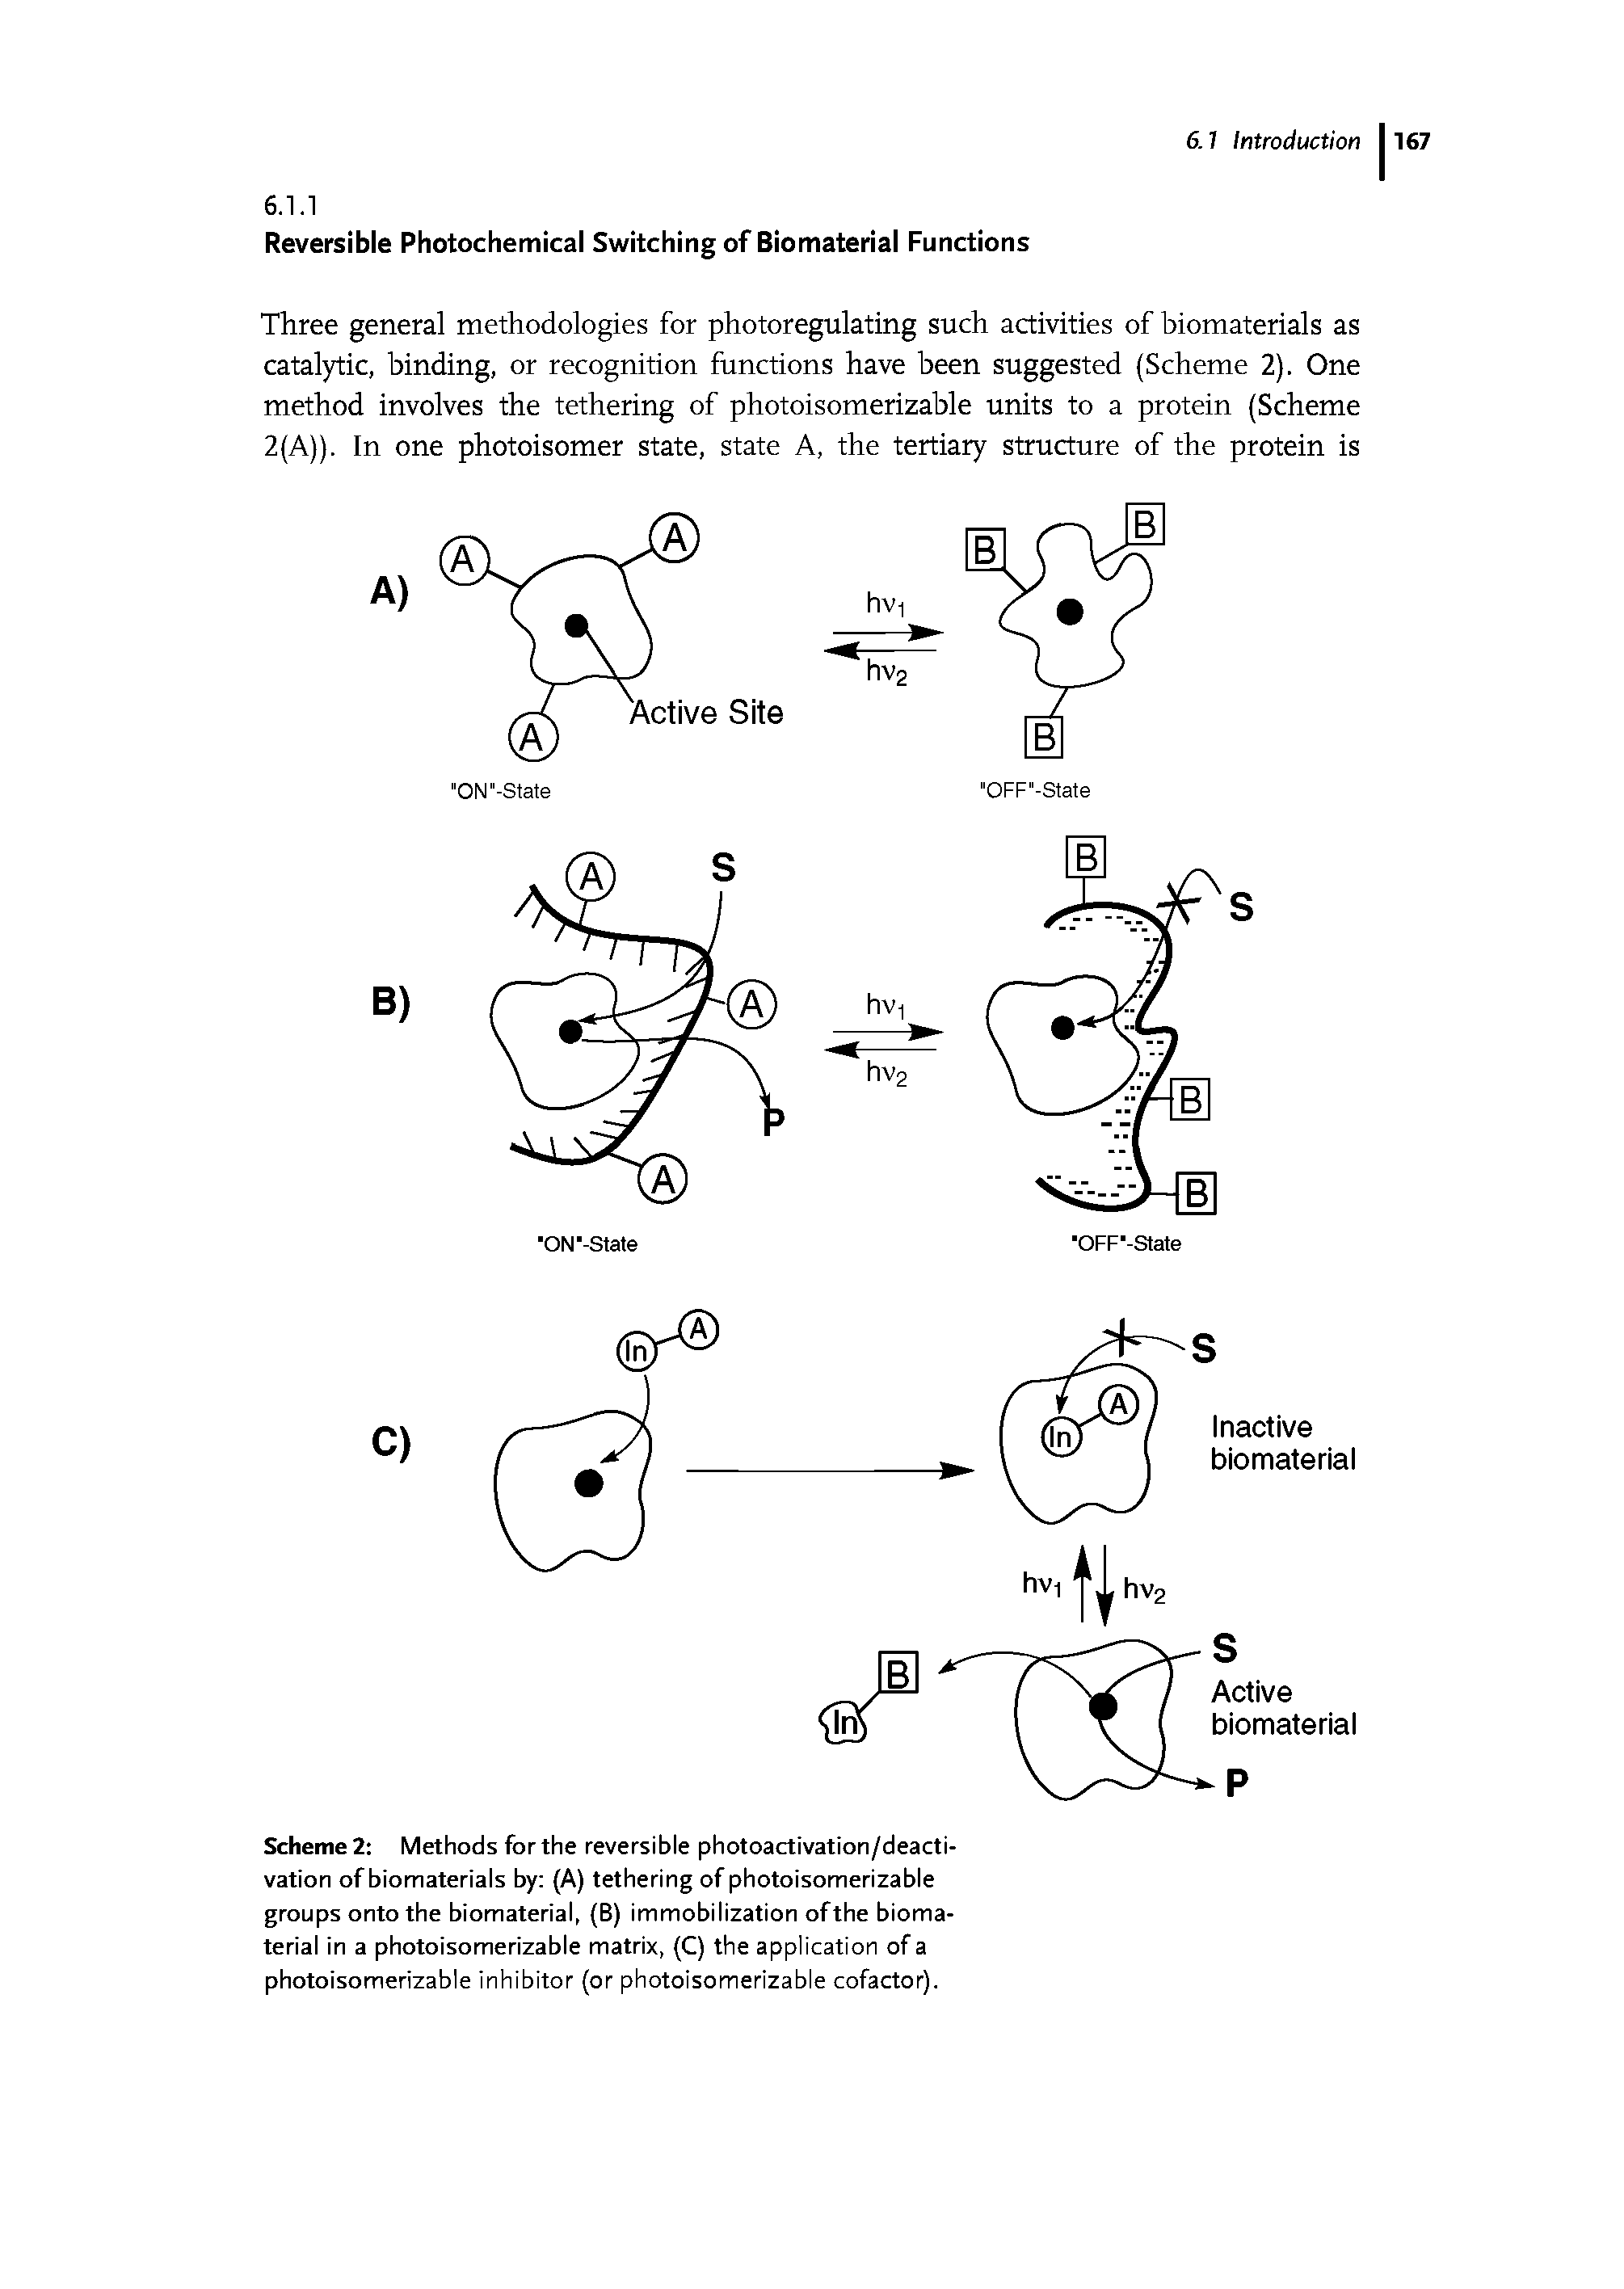 Scheme2 Methods forthe reversible photoactivation/deacti-vation of biomaterials by (A) tethering of photoisomerizable groups onto the biomaterial, (B) immobilization ofthe biomaterial in a photoisomerizable matrix, (C) the application of a photoisomerizable inhibitor (or photoisomerizable cofactor).